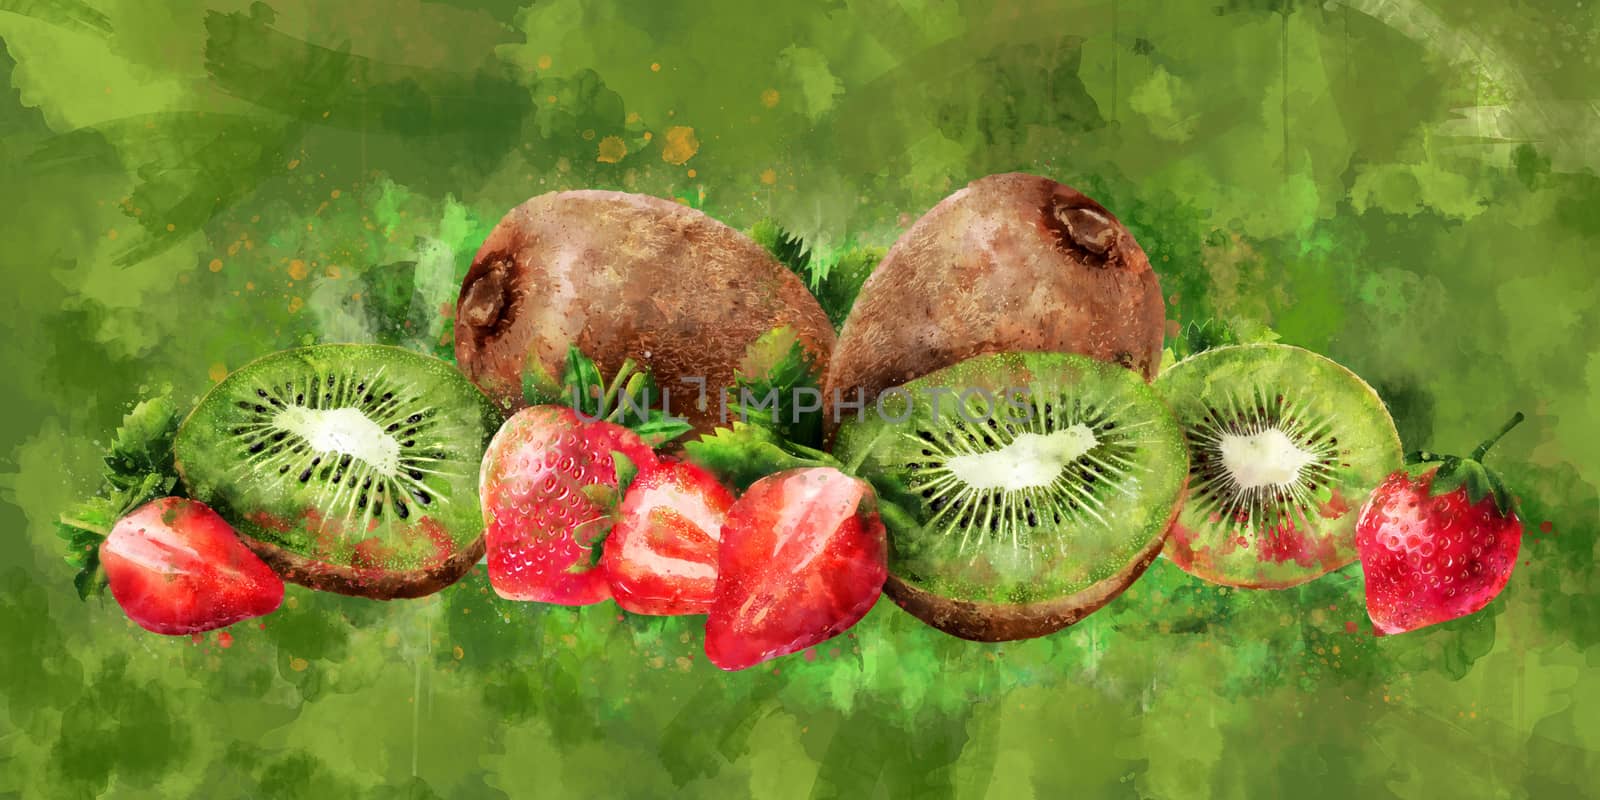 Strawberry and kiwi on green background. Watercolor illustration by ConceptCafe